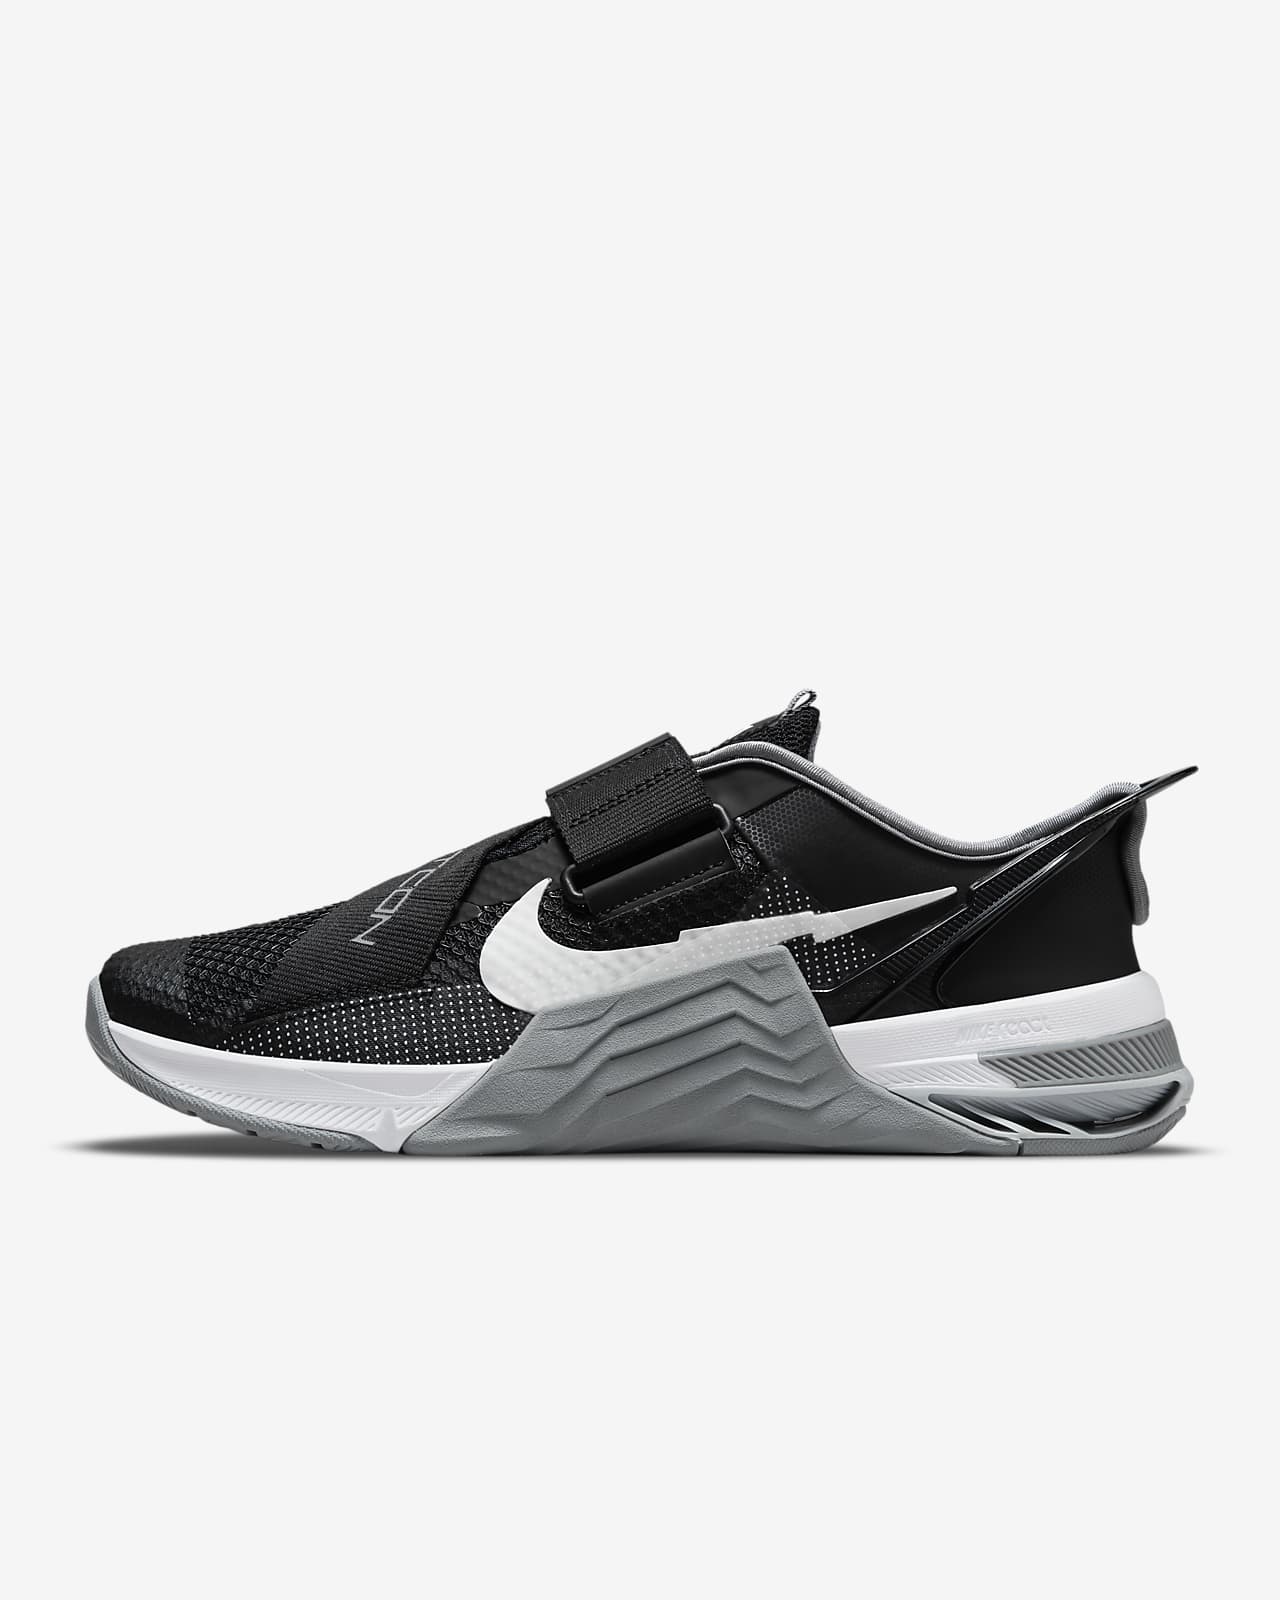 Nike Metcon 7 FlyEase Training Shoes